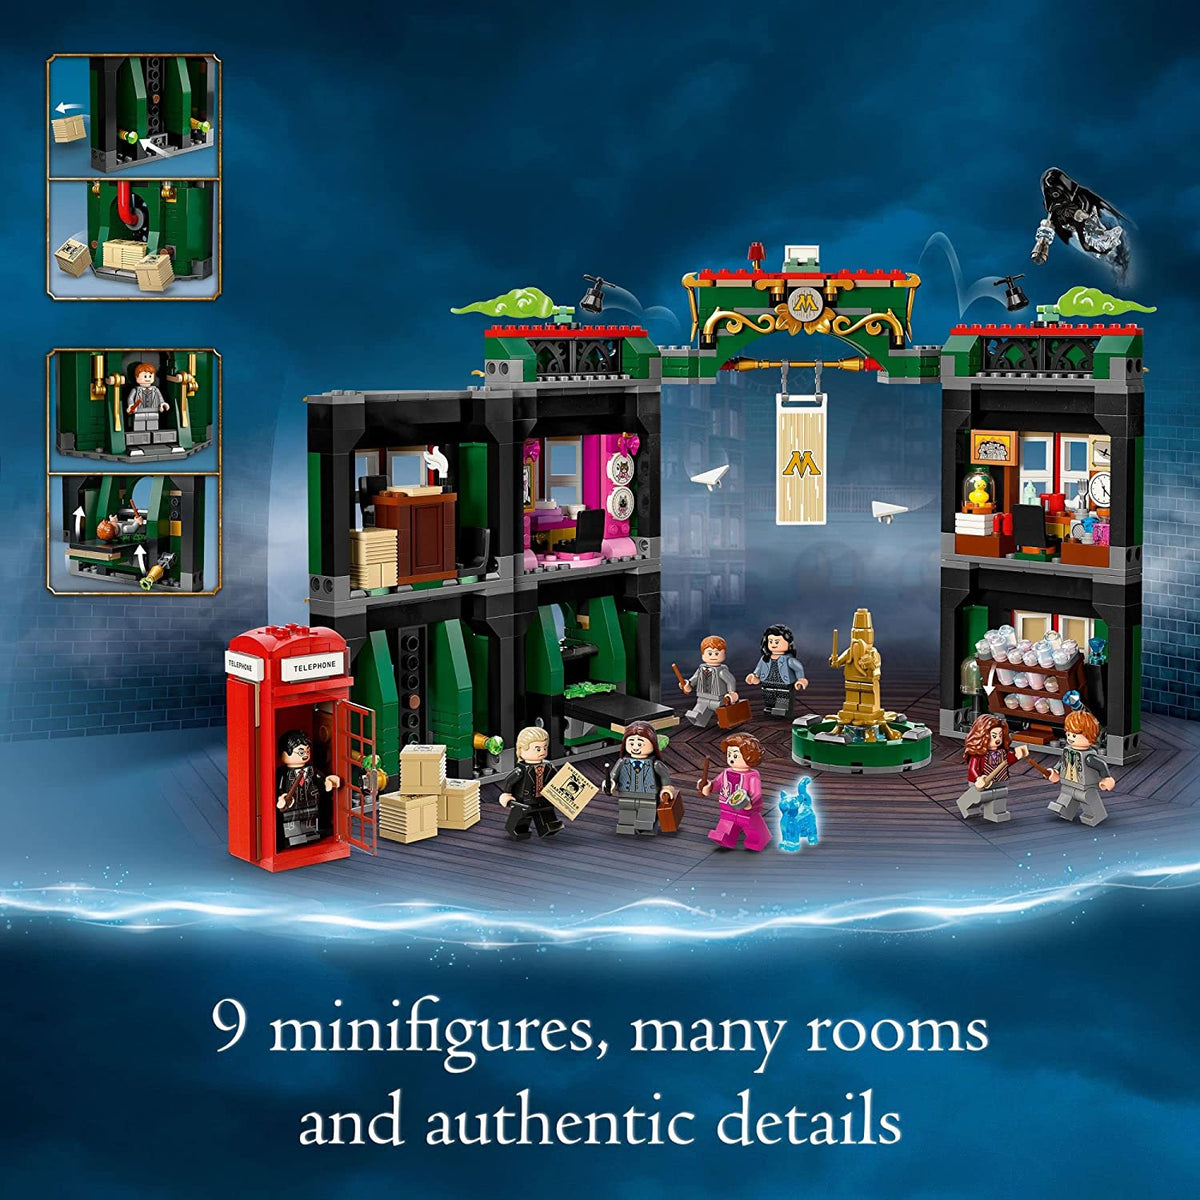 HARRY POTTER 76403: The Ministry of Magic